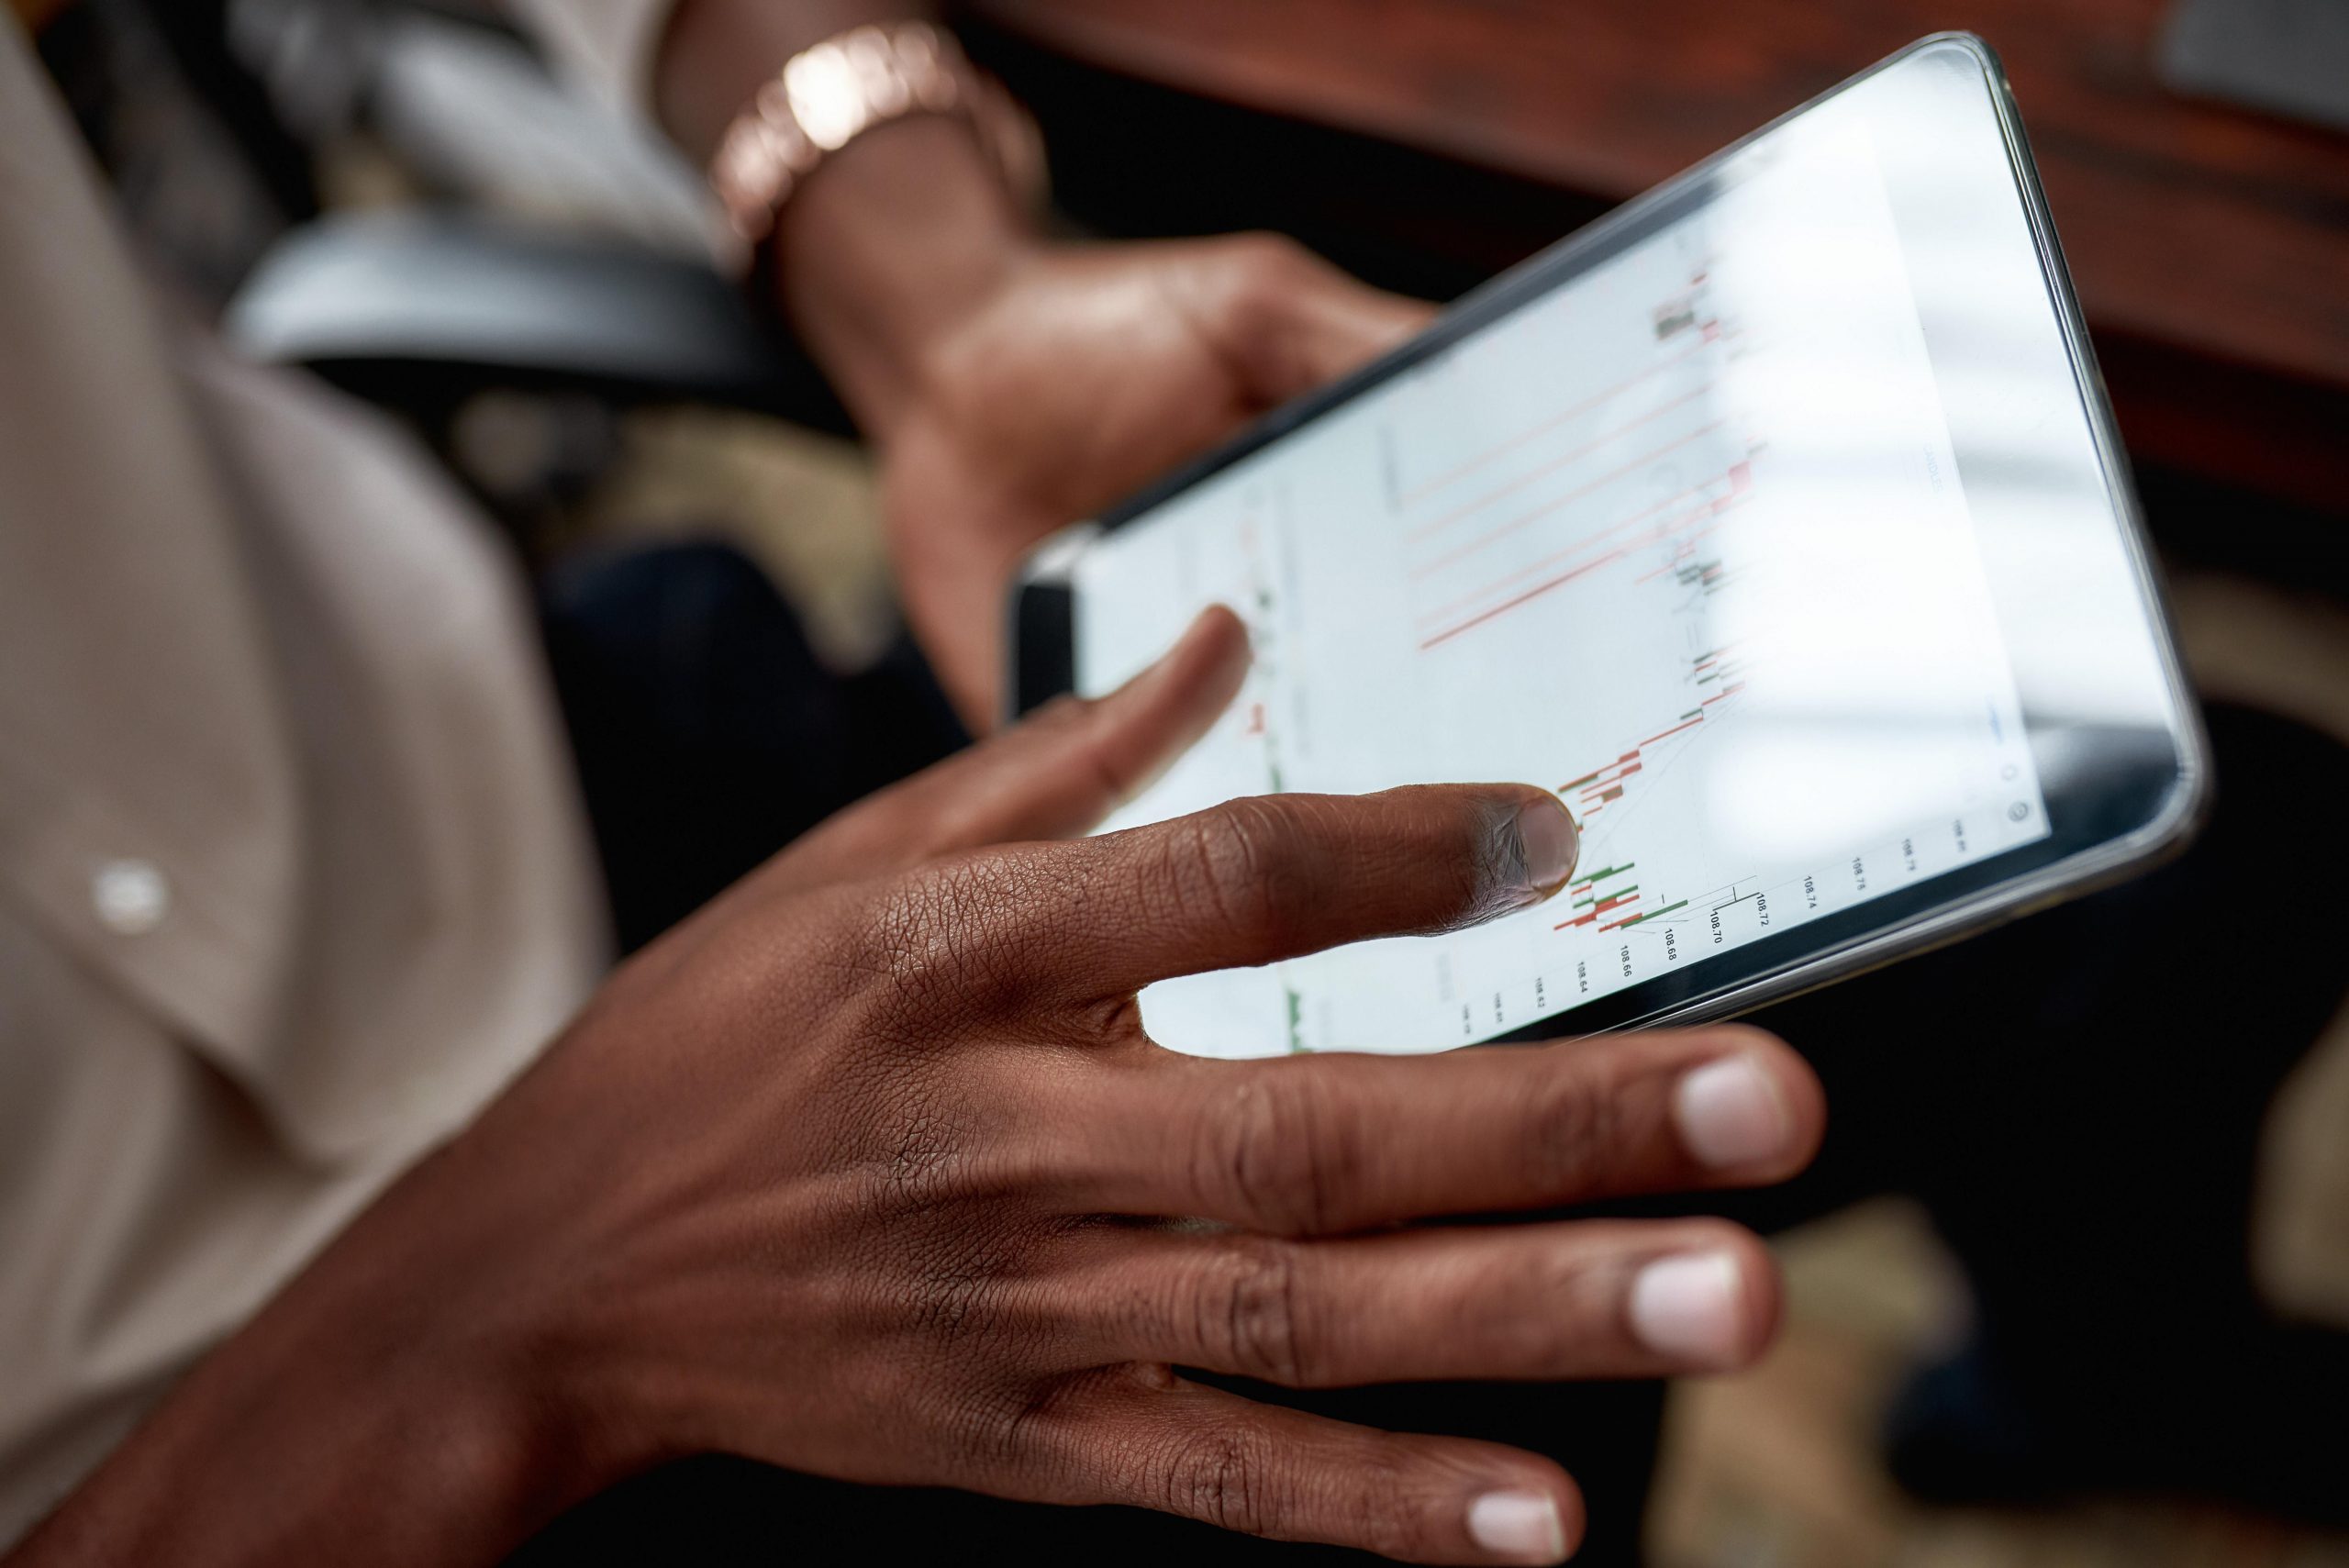 Close up shot of hands holding tablet, analyzing stock market chart, need for rebalancing.